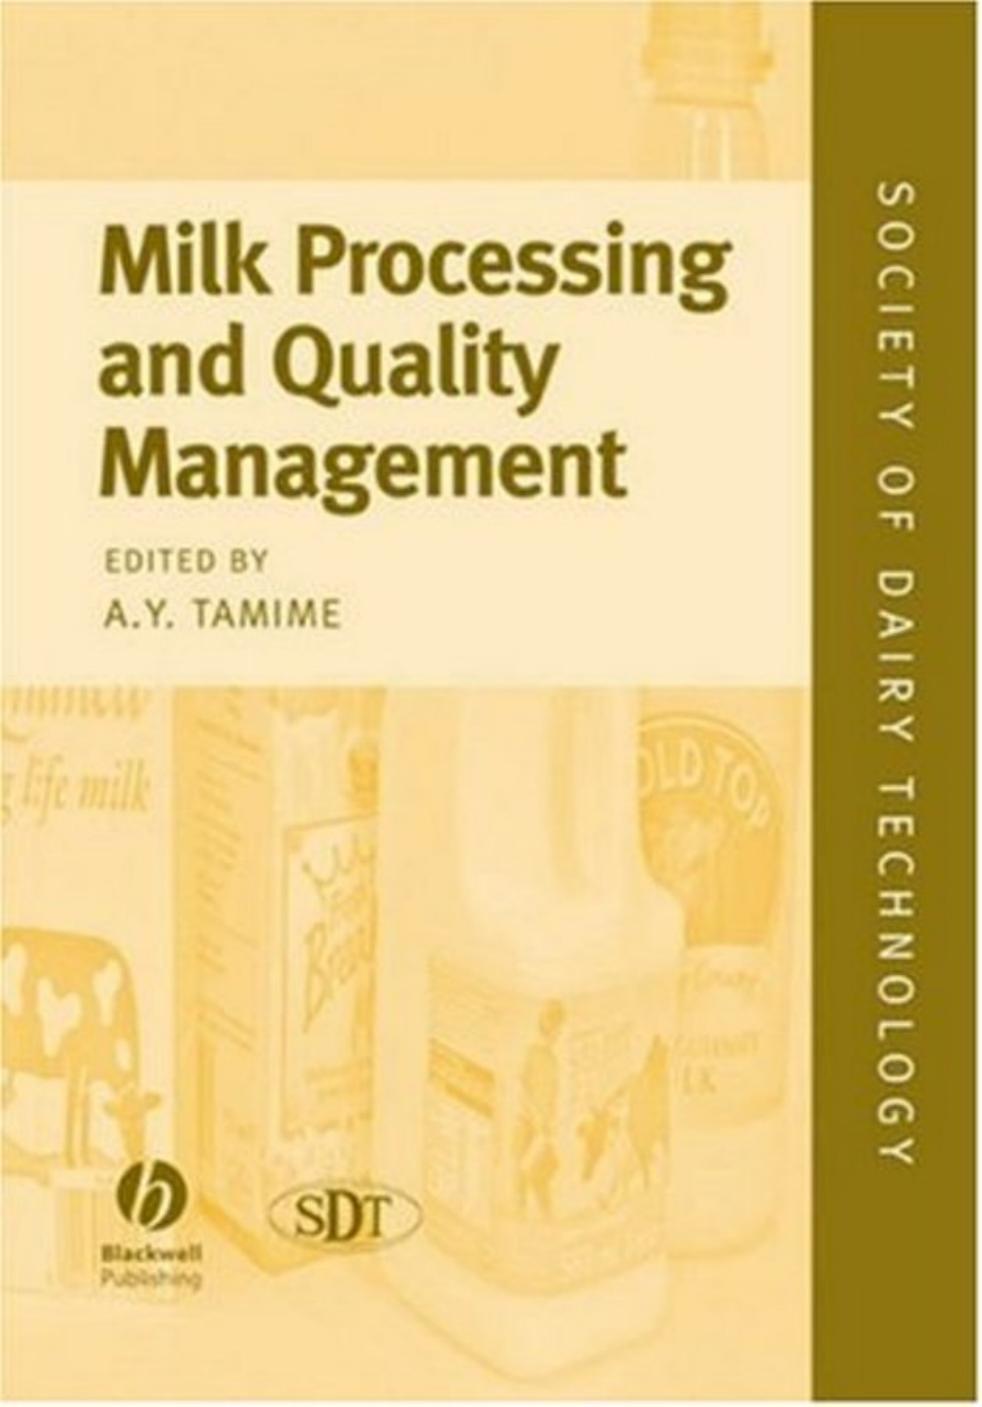 Milk Processing and Quality Management 2009